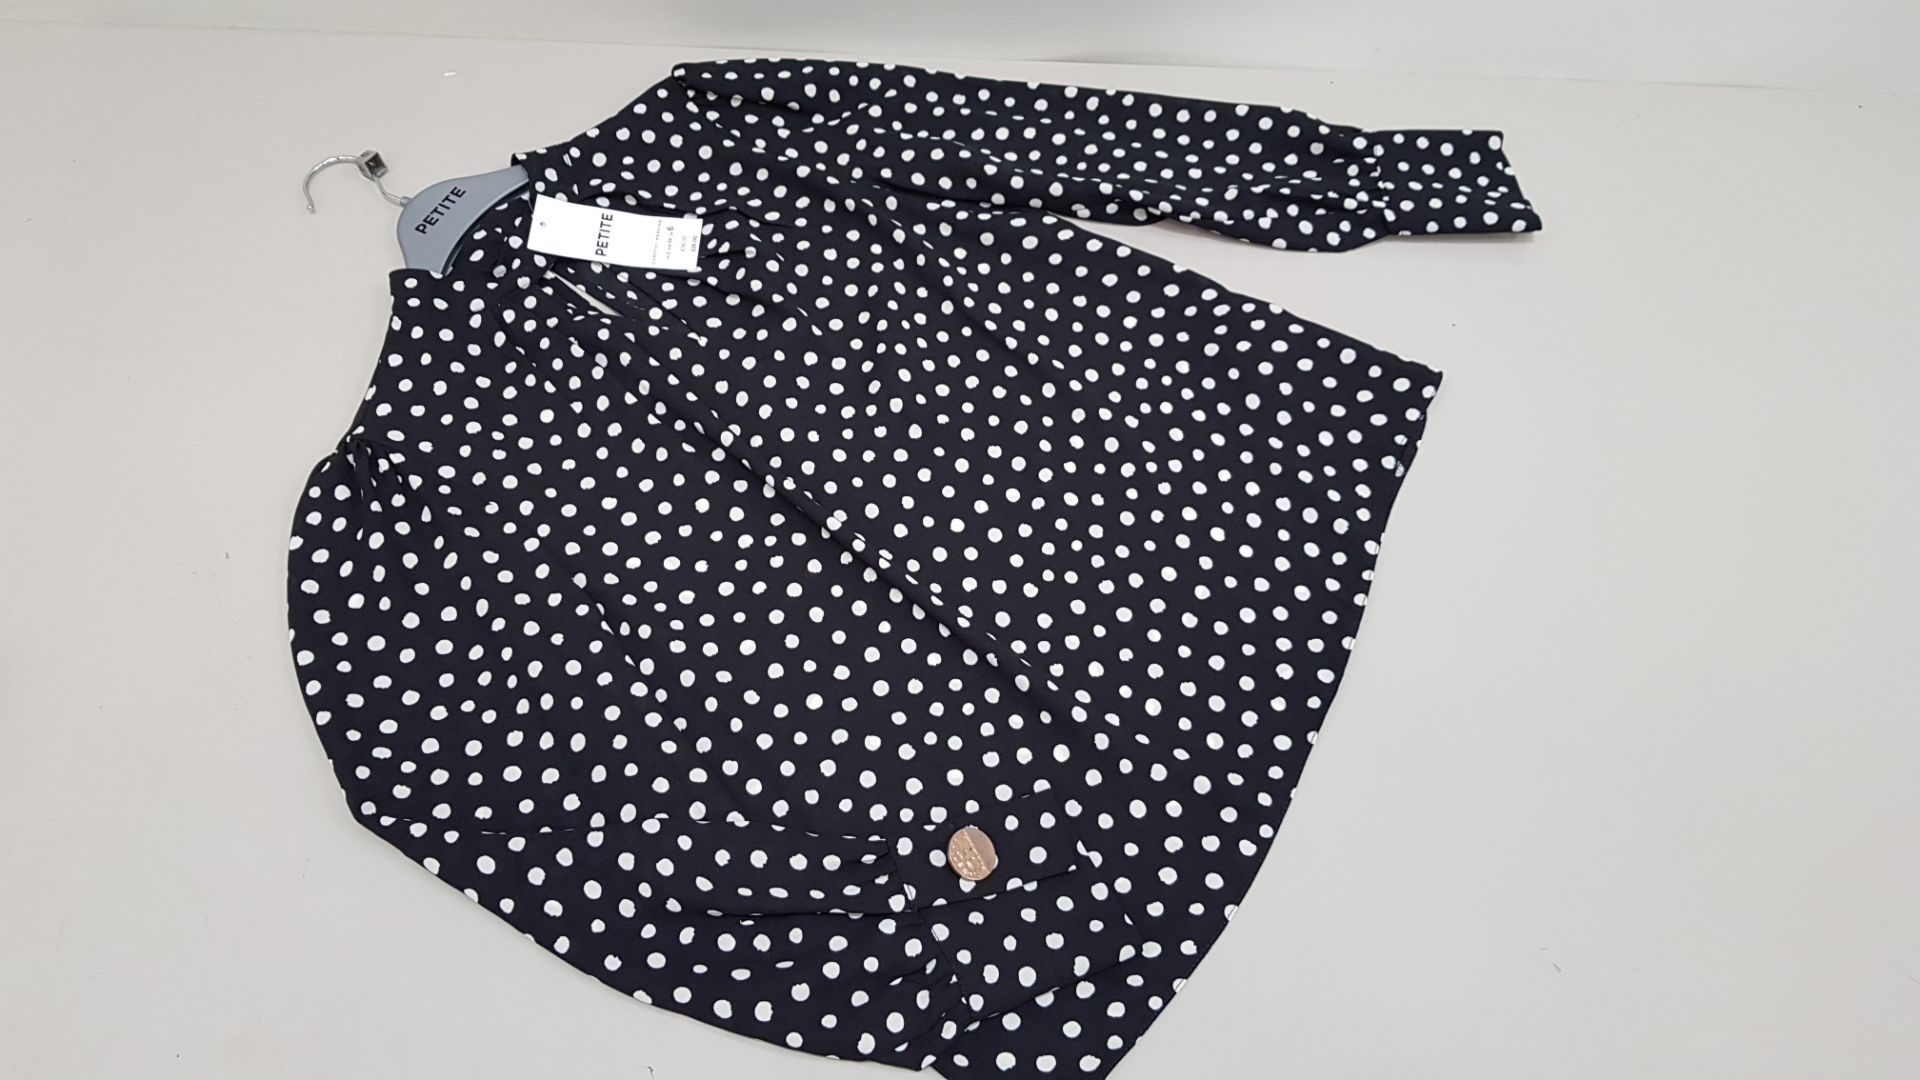 40 X BRAND NEW DOROTHY PERKINS PETITE DOTTED BLOUSES UK SIZE 8 RRP £26.00 (TOTAL RRP £1040.00)